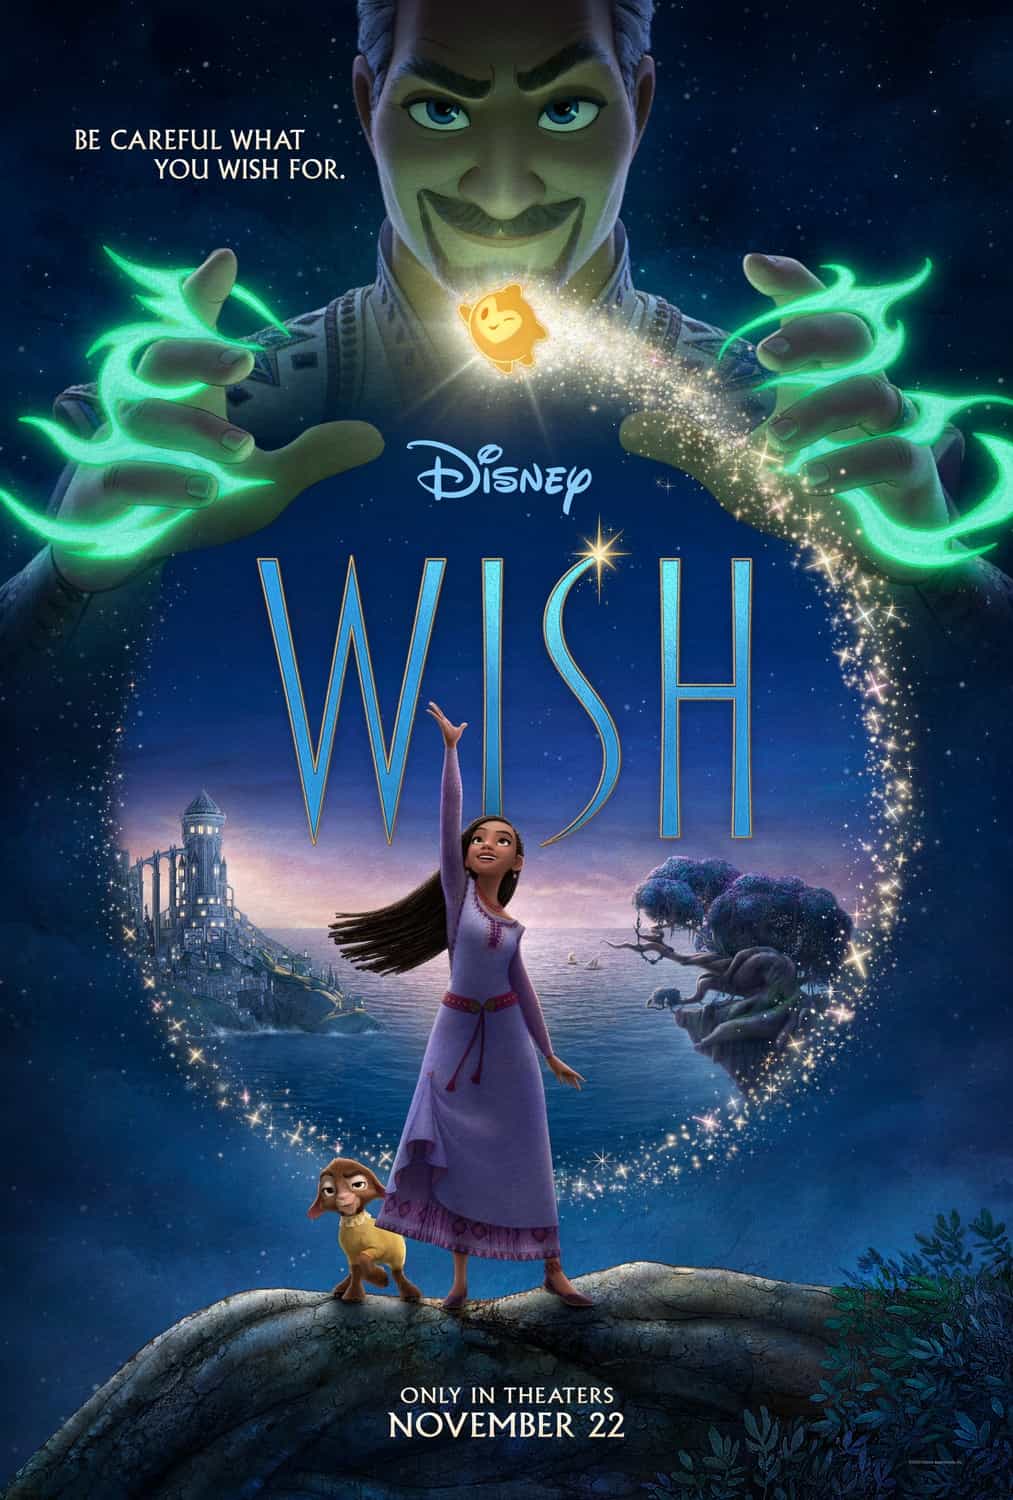 Check out the new trailer and poster for upcoming movie Wish which stars Chris Pine and Alan Tudyk - movie UK release date 24th November 2023 #wish